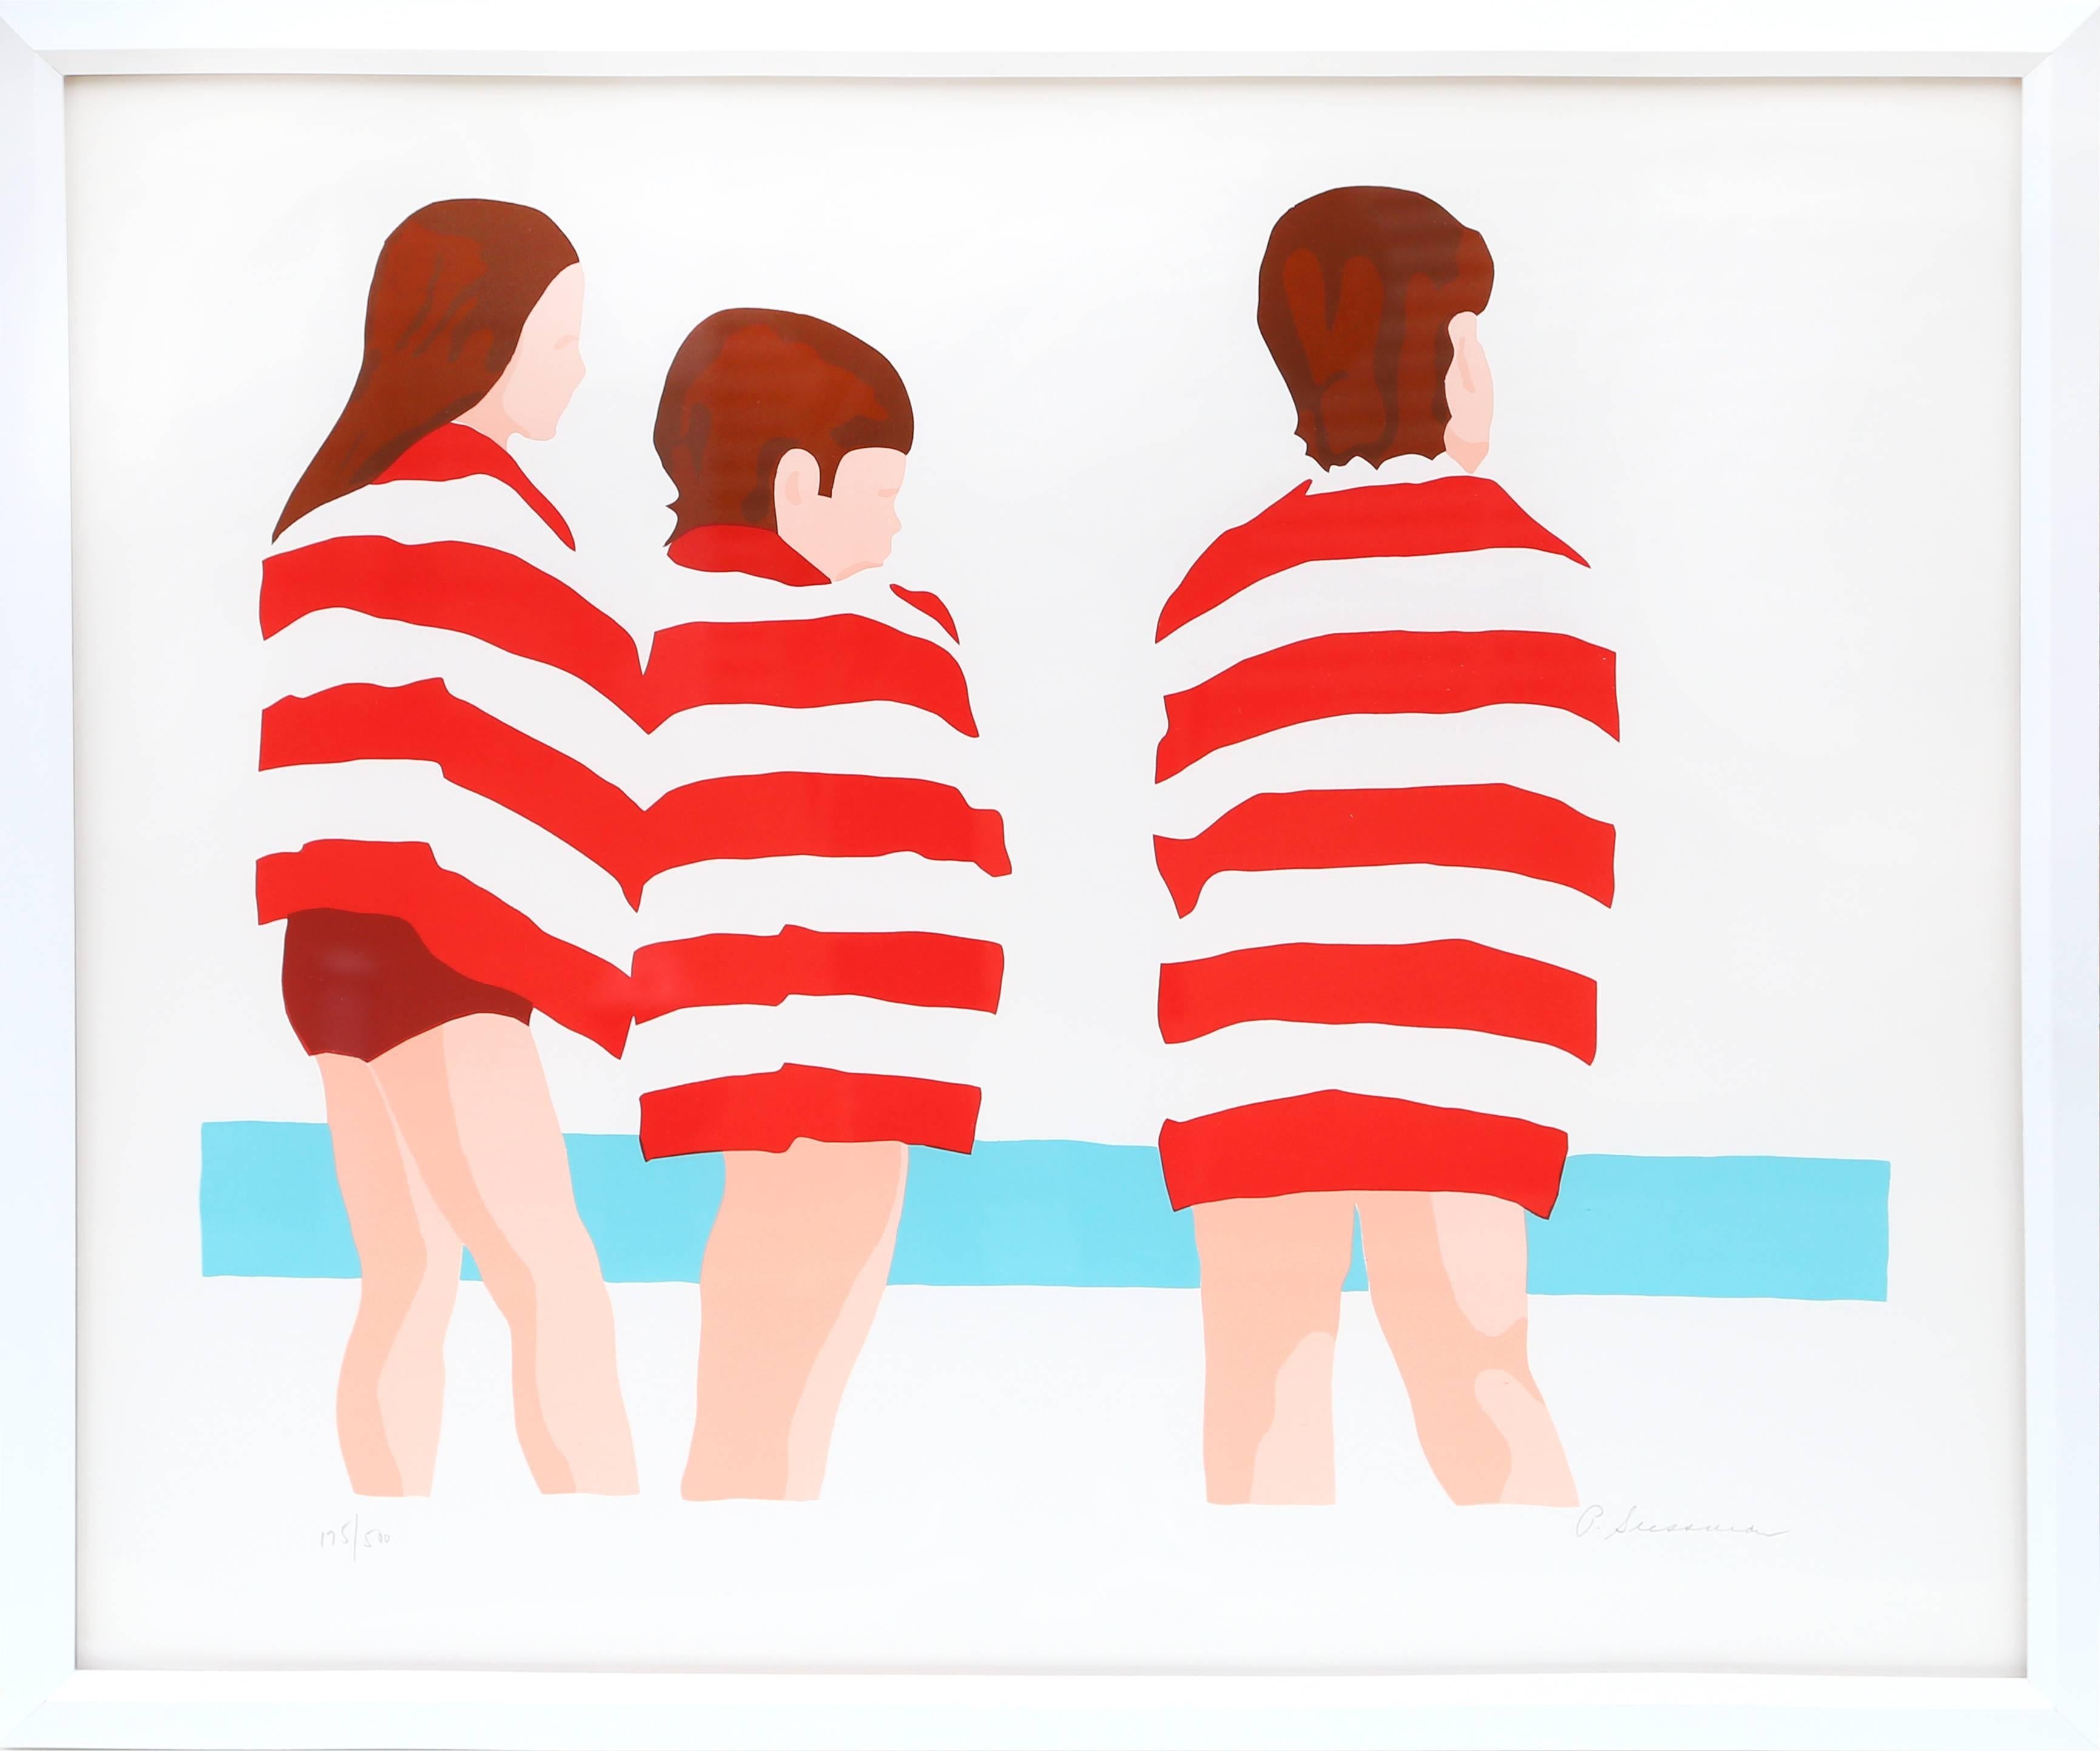 Artist: Patricia Sussman
Title:	The Beach (Red Stripes)
Year:	circa 1979
Medium:	Serigraph, signed and numbered in pencil
Edition: 500, AP 50
Paper Size:	22 in. x 25 in. (55.88 cm x 63.5 cm)
Frame:  25 x 28 inches